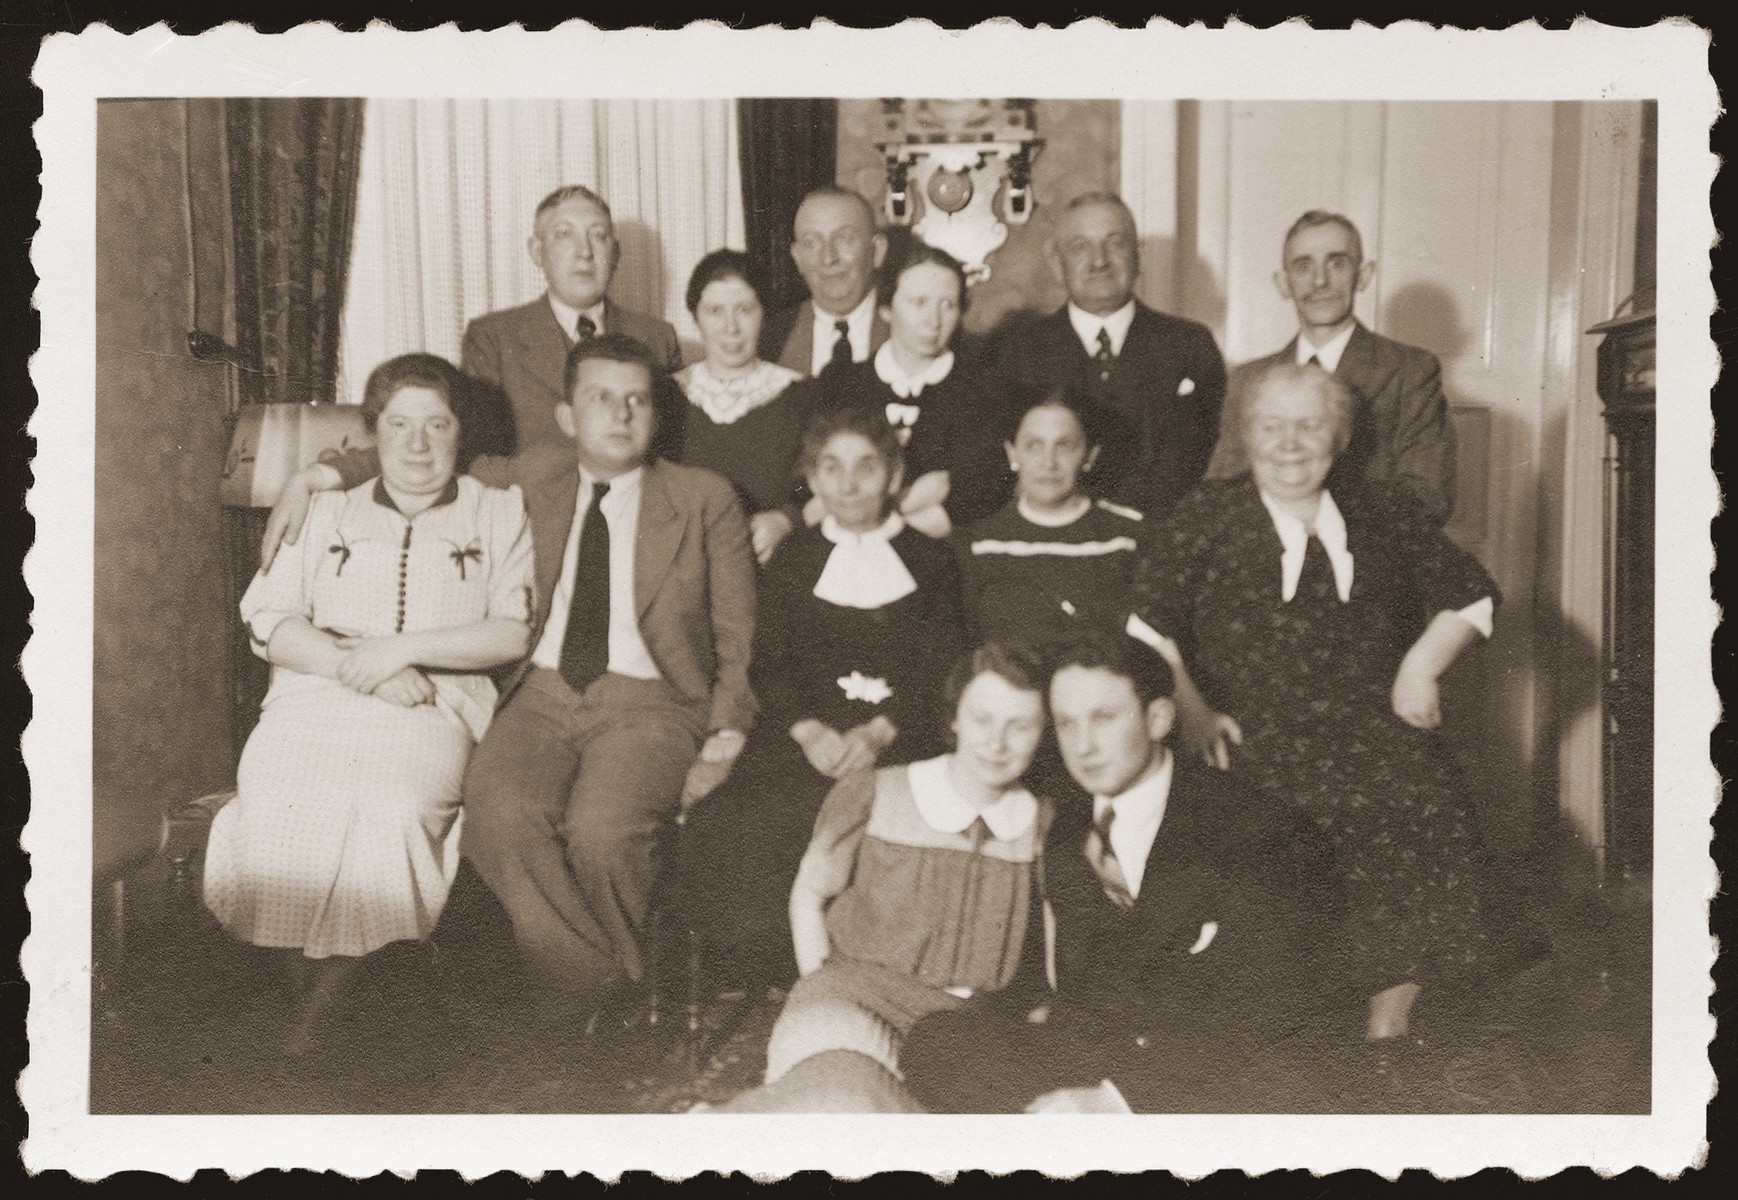 Gera and Alfred Borchart celebrate their engagement with friends and family at the Hettman home.  

Pictured seated second from the left is Walter Jacobsberg.  His father, Siegfried, stands third from the left in the back.

Gera and Alfred Borchart were later deported to the Belzyce ghetto, where they were married on October 29, 1940.  The two perished two years later.